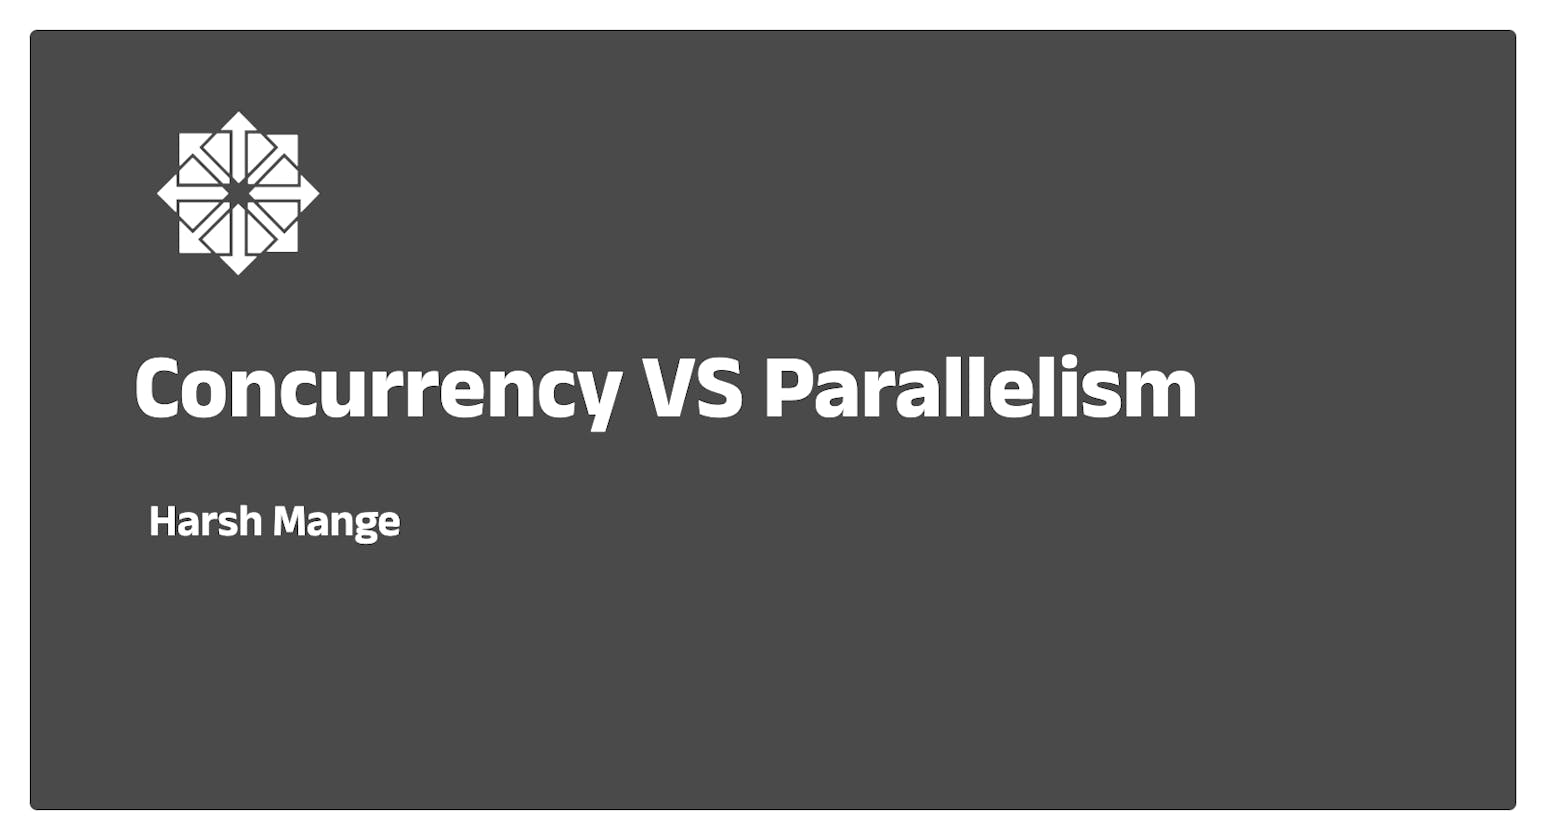 Understanding the Difference Between Concurrency and Parallelism